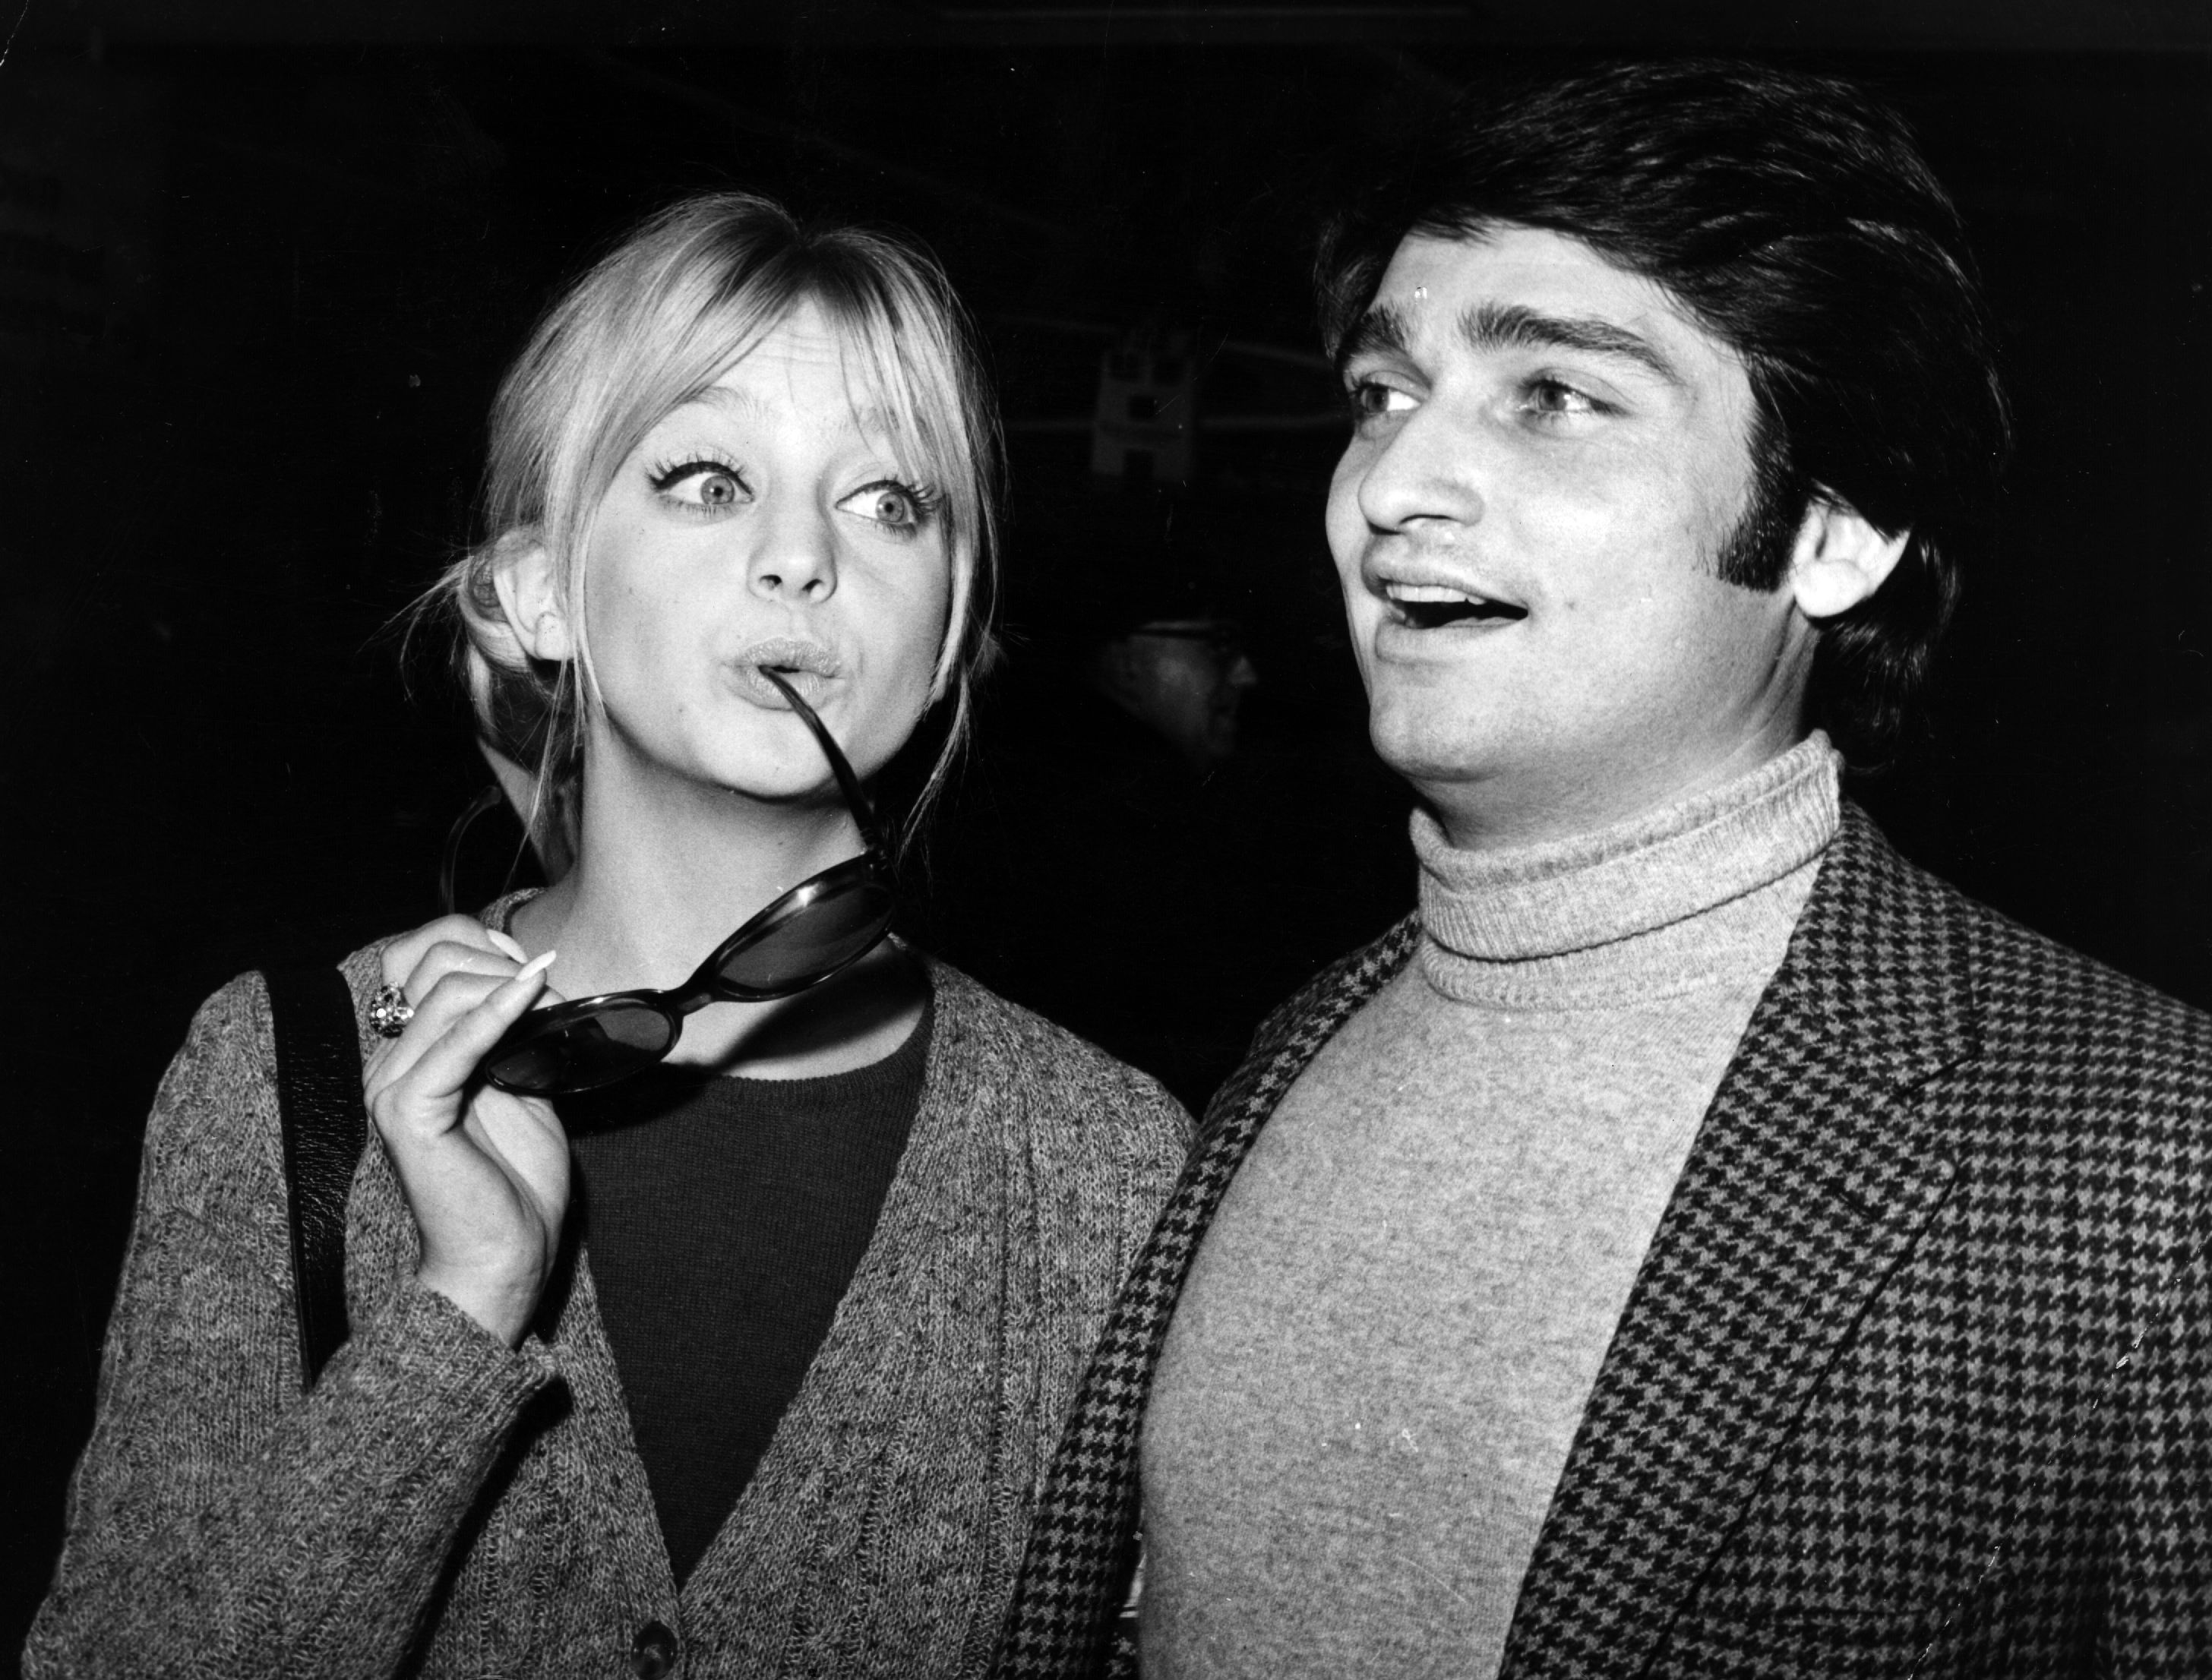 Goldie Hawn, one of the stars of the American TV show, 'Rowan and Martin's Laugh-In' on a visit to England. She is acompanied by her husband, Gus Trikonis | Source: Getty Images